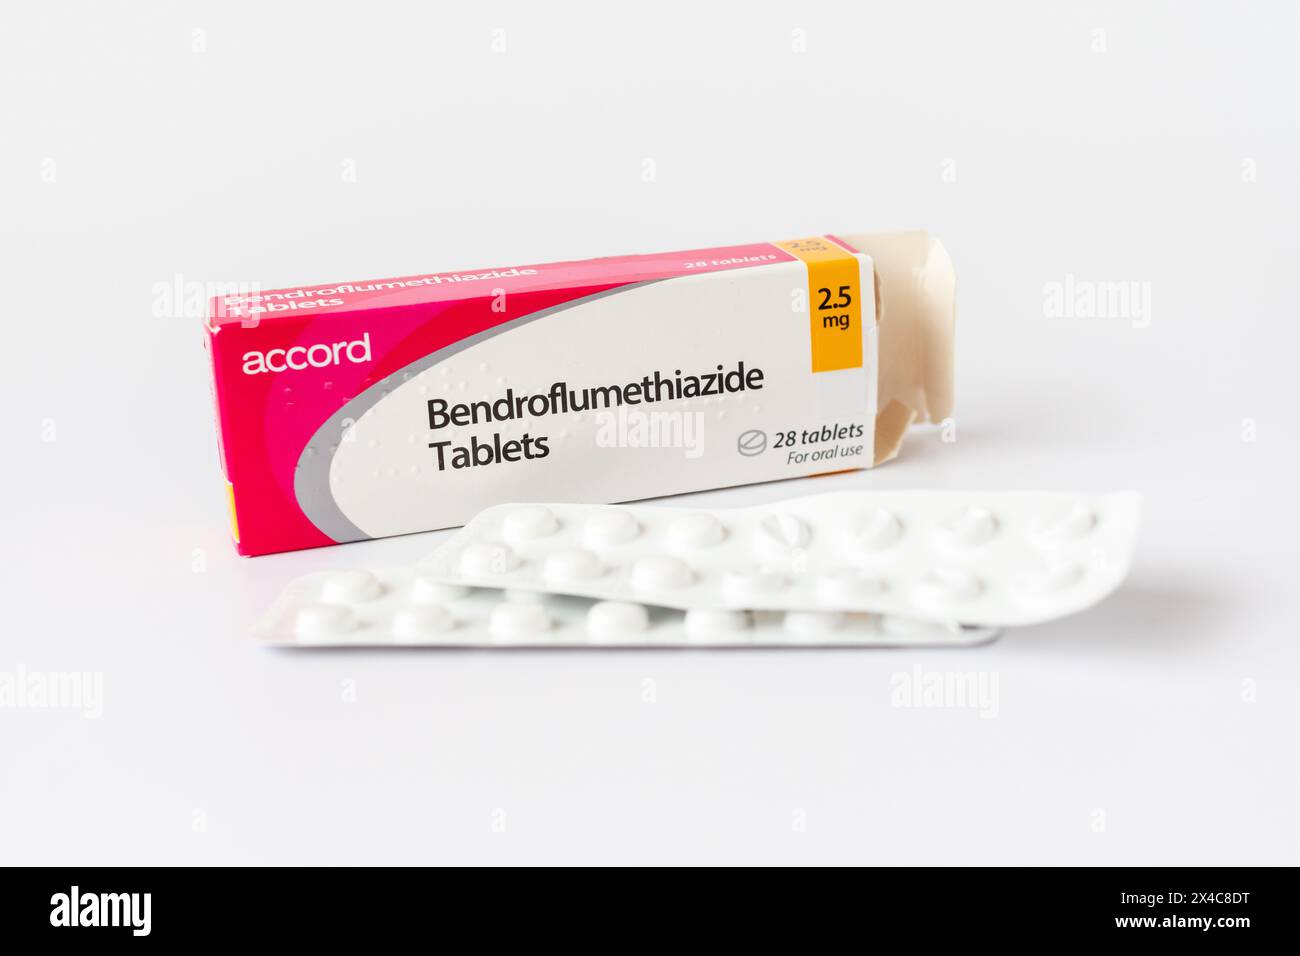 Photograph of a box of Bendroflumethiazide 2.5mg tablets against a white background. Stock Photo